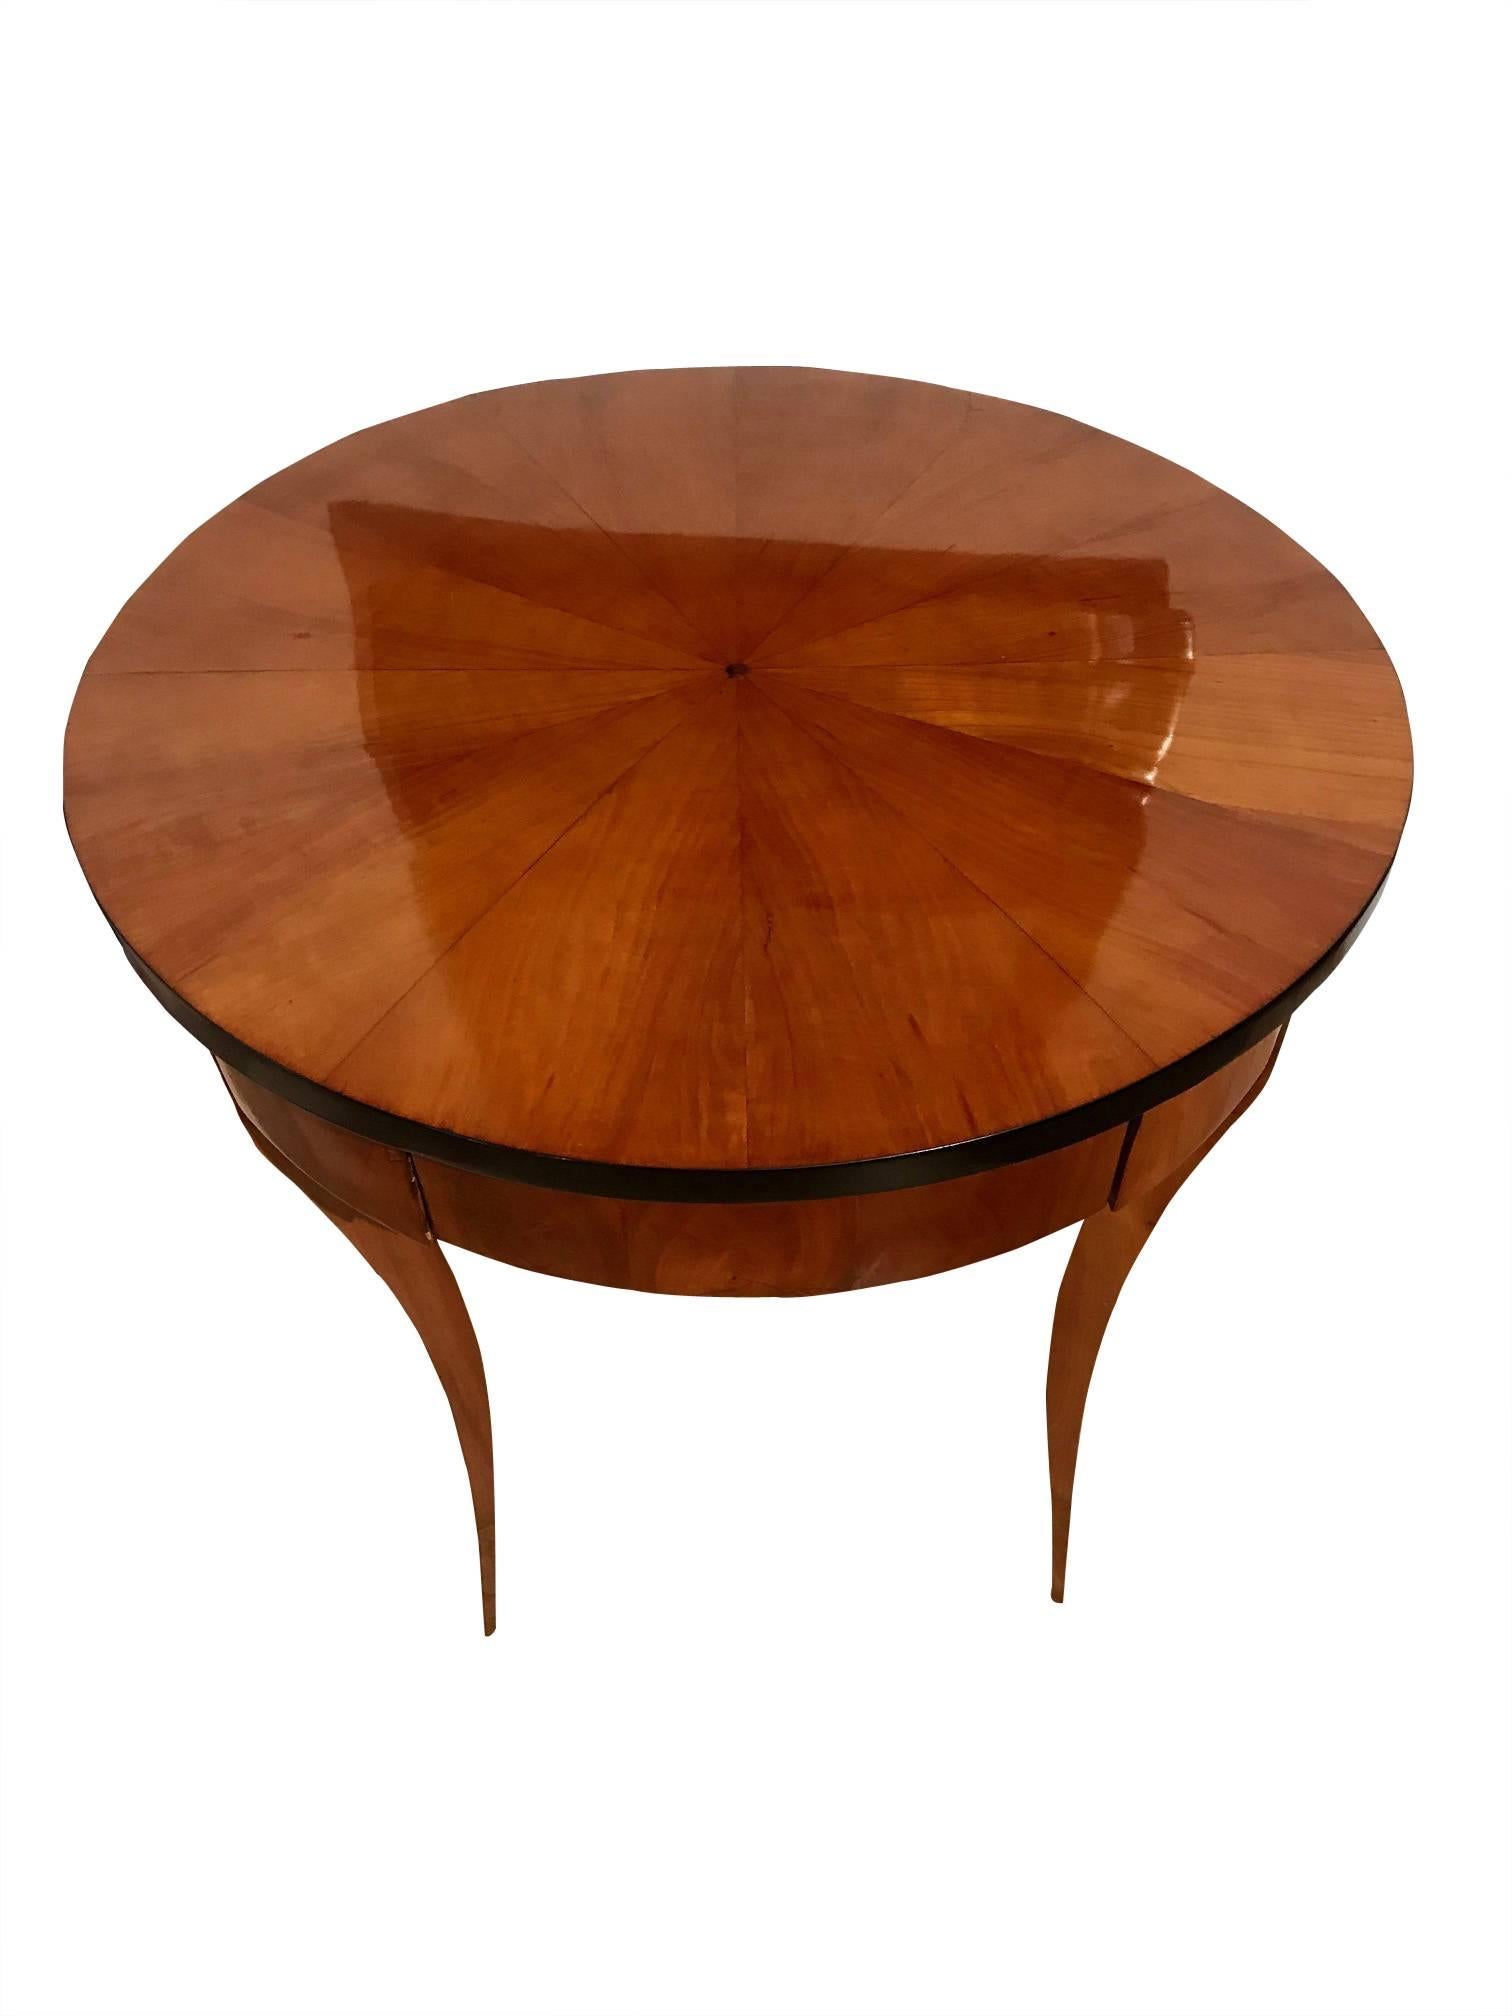 Elegant, round Biedermeier side table with star shaped cherry veneer at the plate. This early Biedermeier table dates back to circa 1820 and has been manufactured in South Germany. It has a drawer at the front and very elegant, light, conical